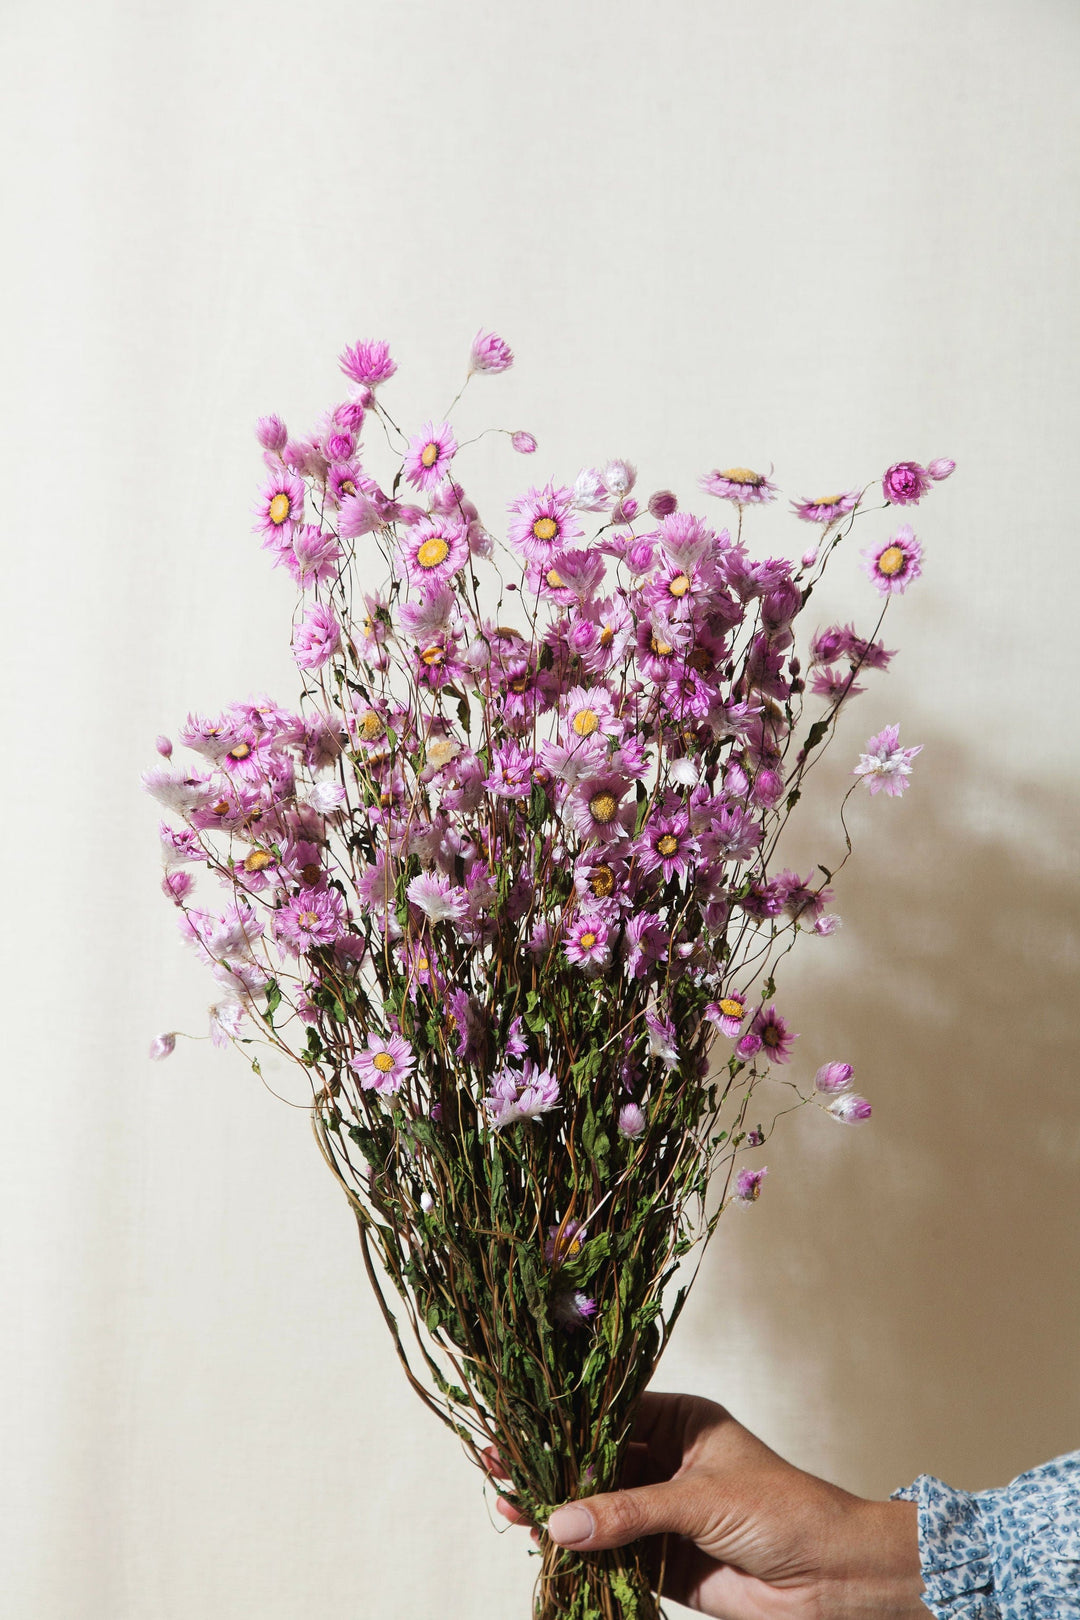 Idlewild Floral Co. Bunches Pink Rhodanthe Daisy